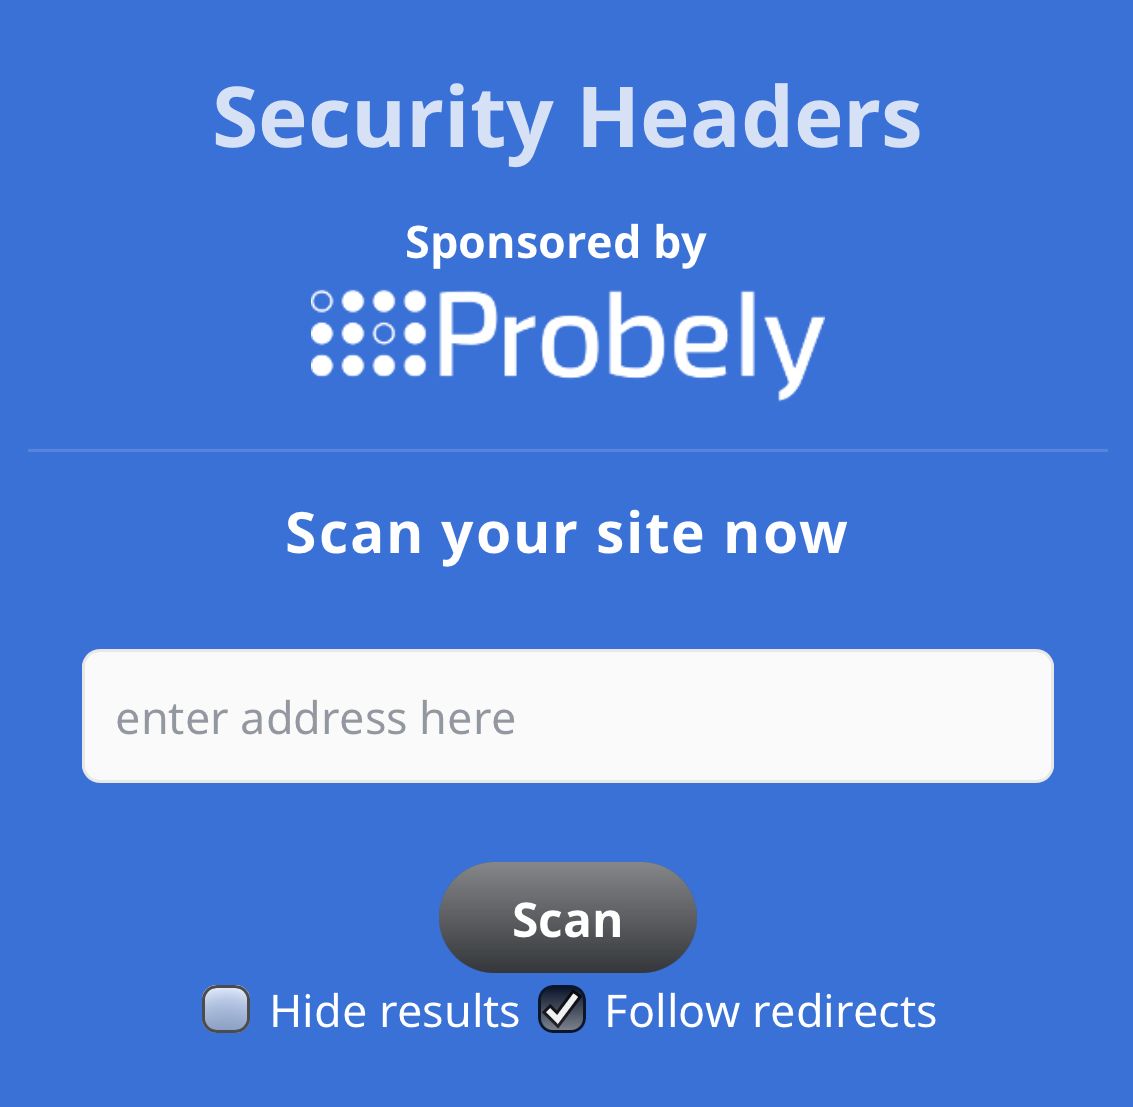 A screenshot of the mobile version of securityheaders.com. It shows an input field for the website and scan button.